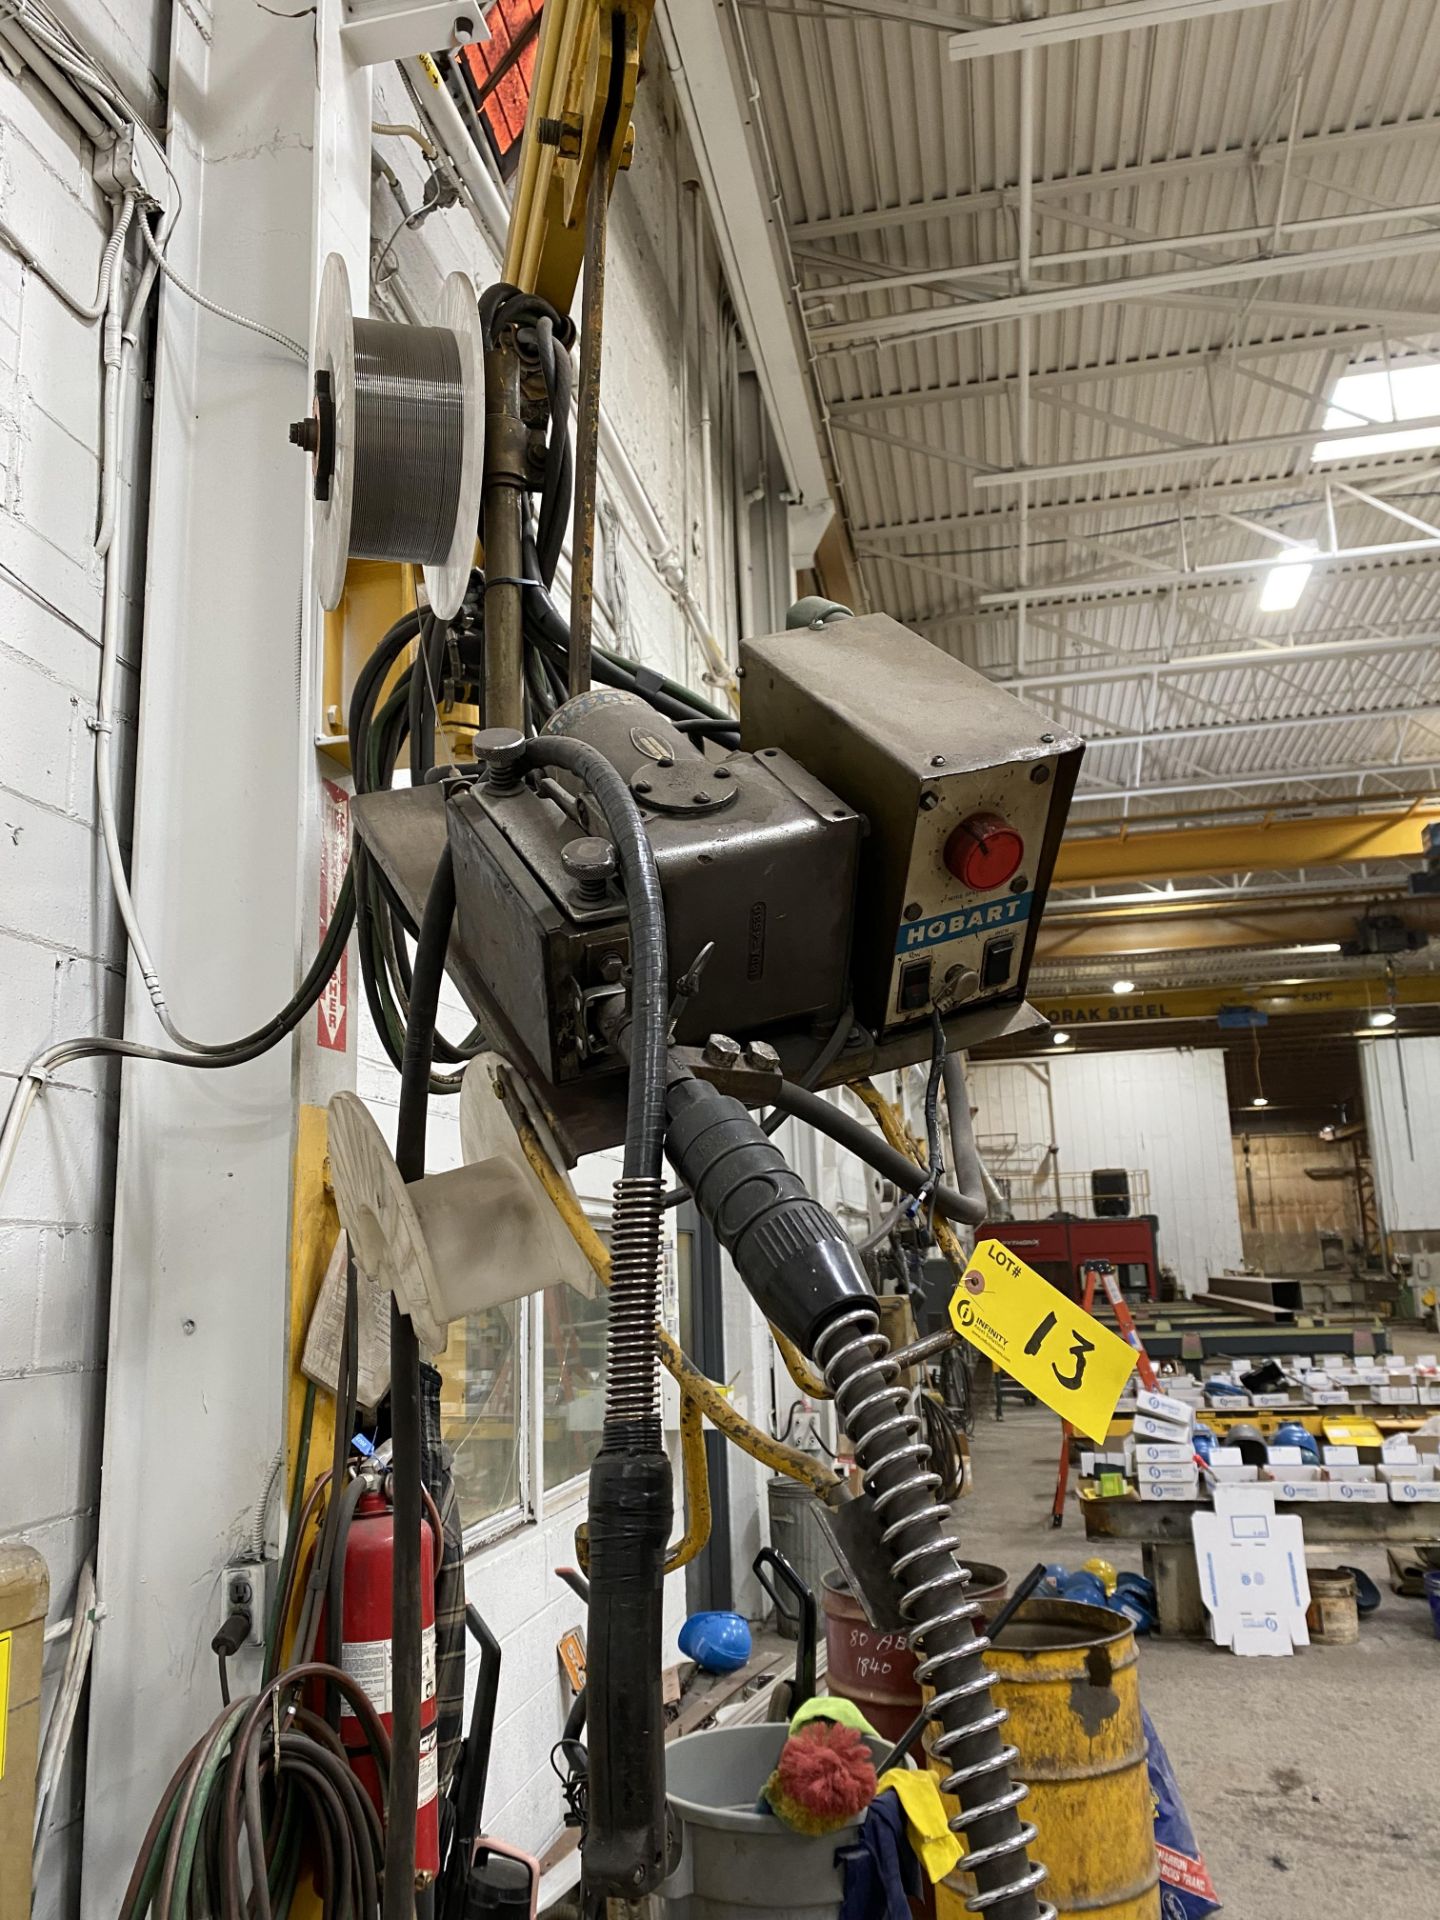 HOBART MEGA-FLEX 650 RVS MIG WELDER W/ HOBART WIRE FEEDER, CABLES AND STAND - Image 6 of 7